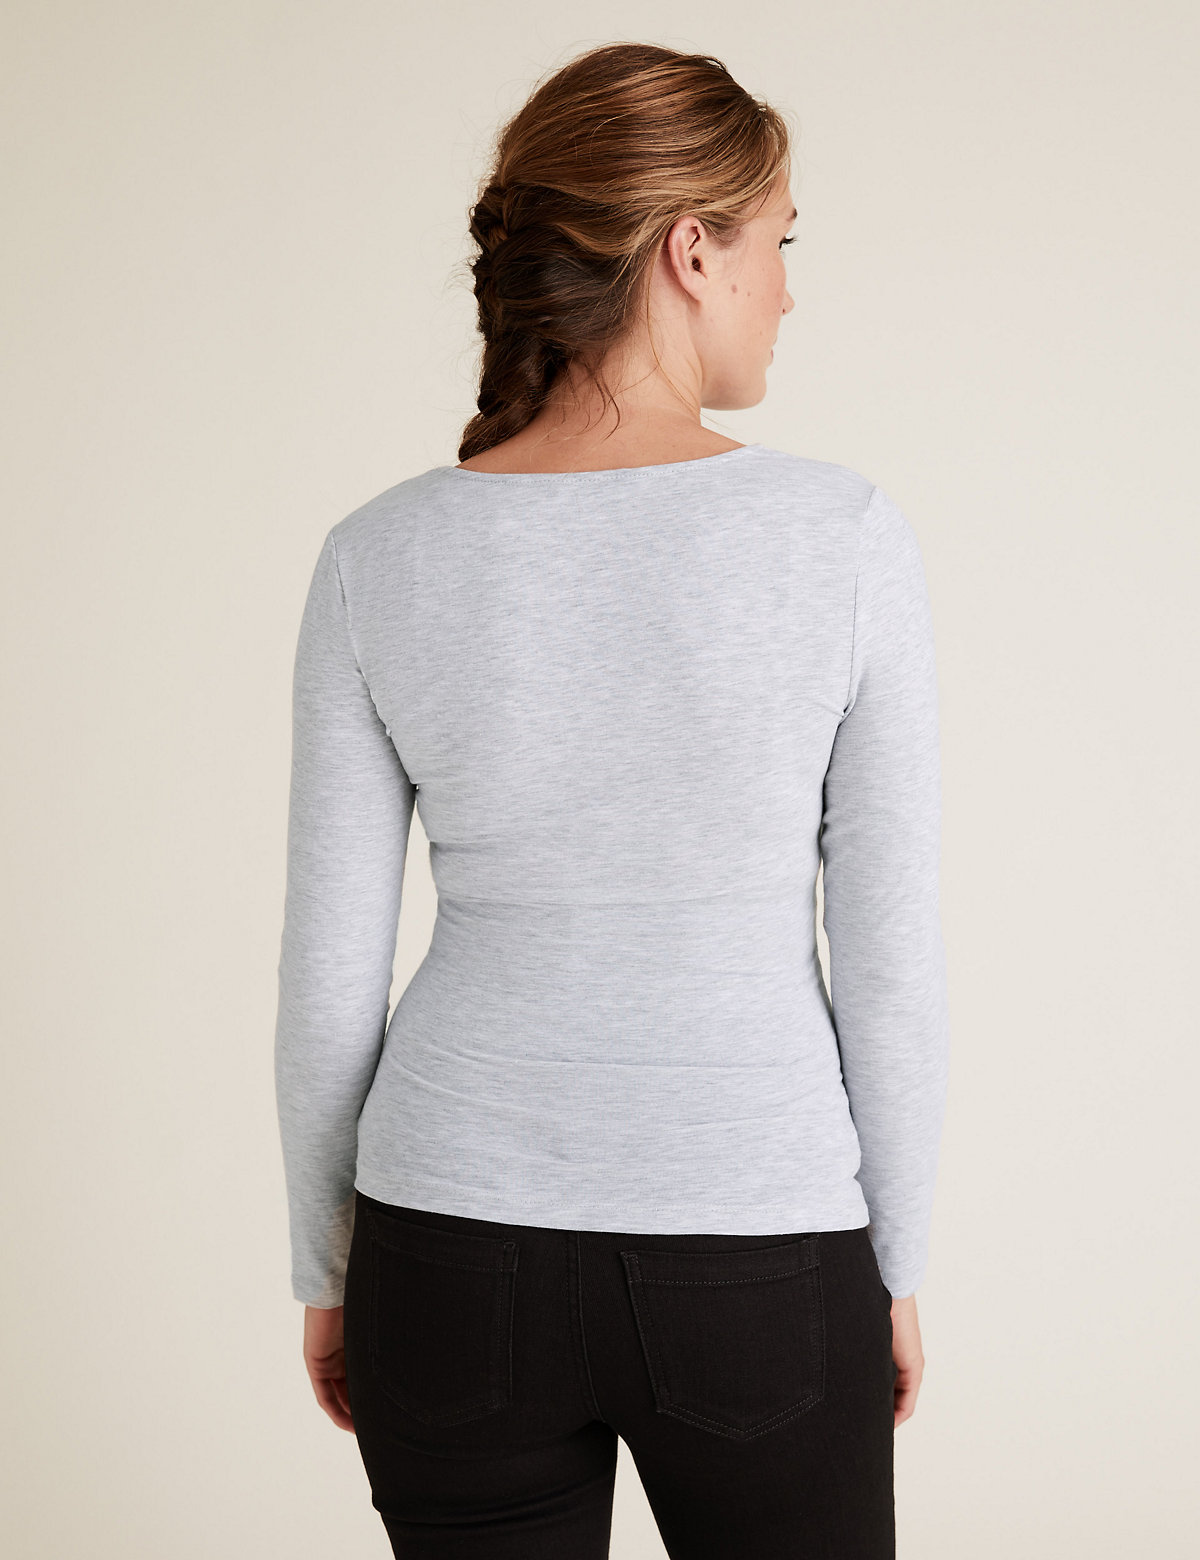 Maternity Cotton Fitted Nursing Top